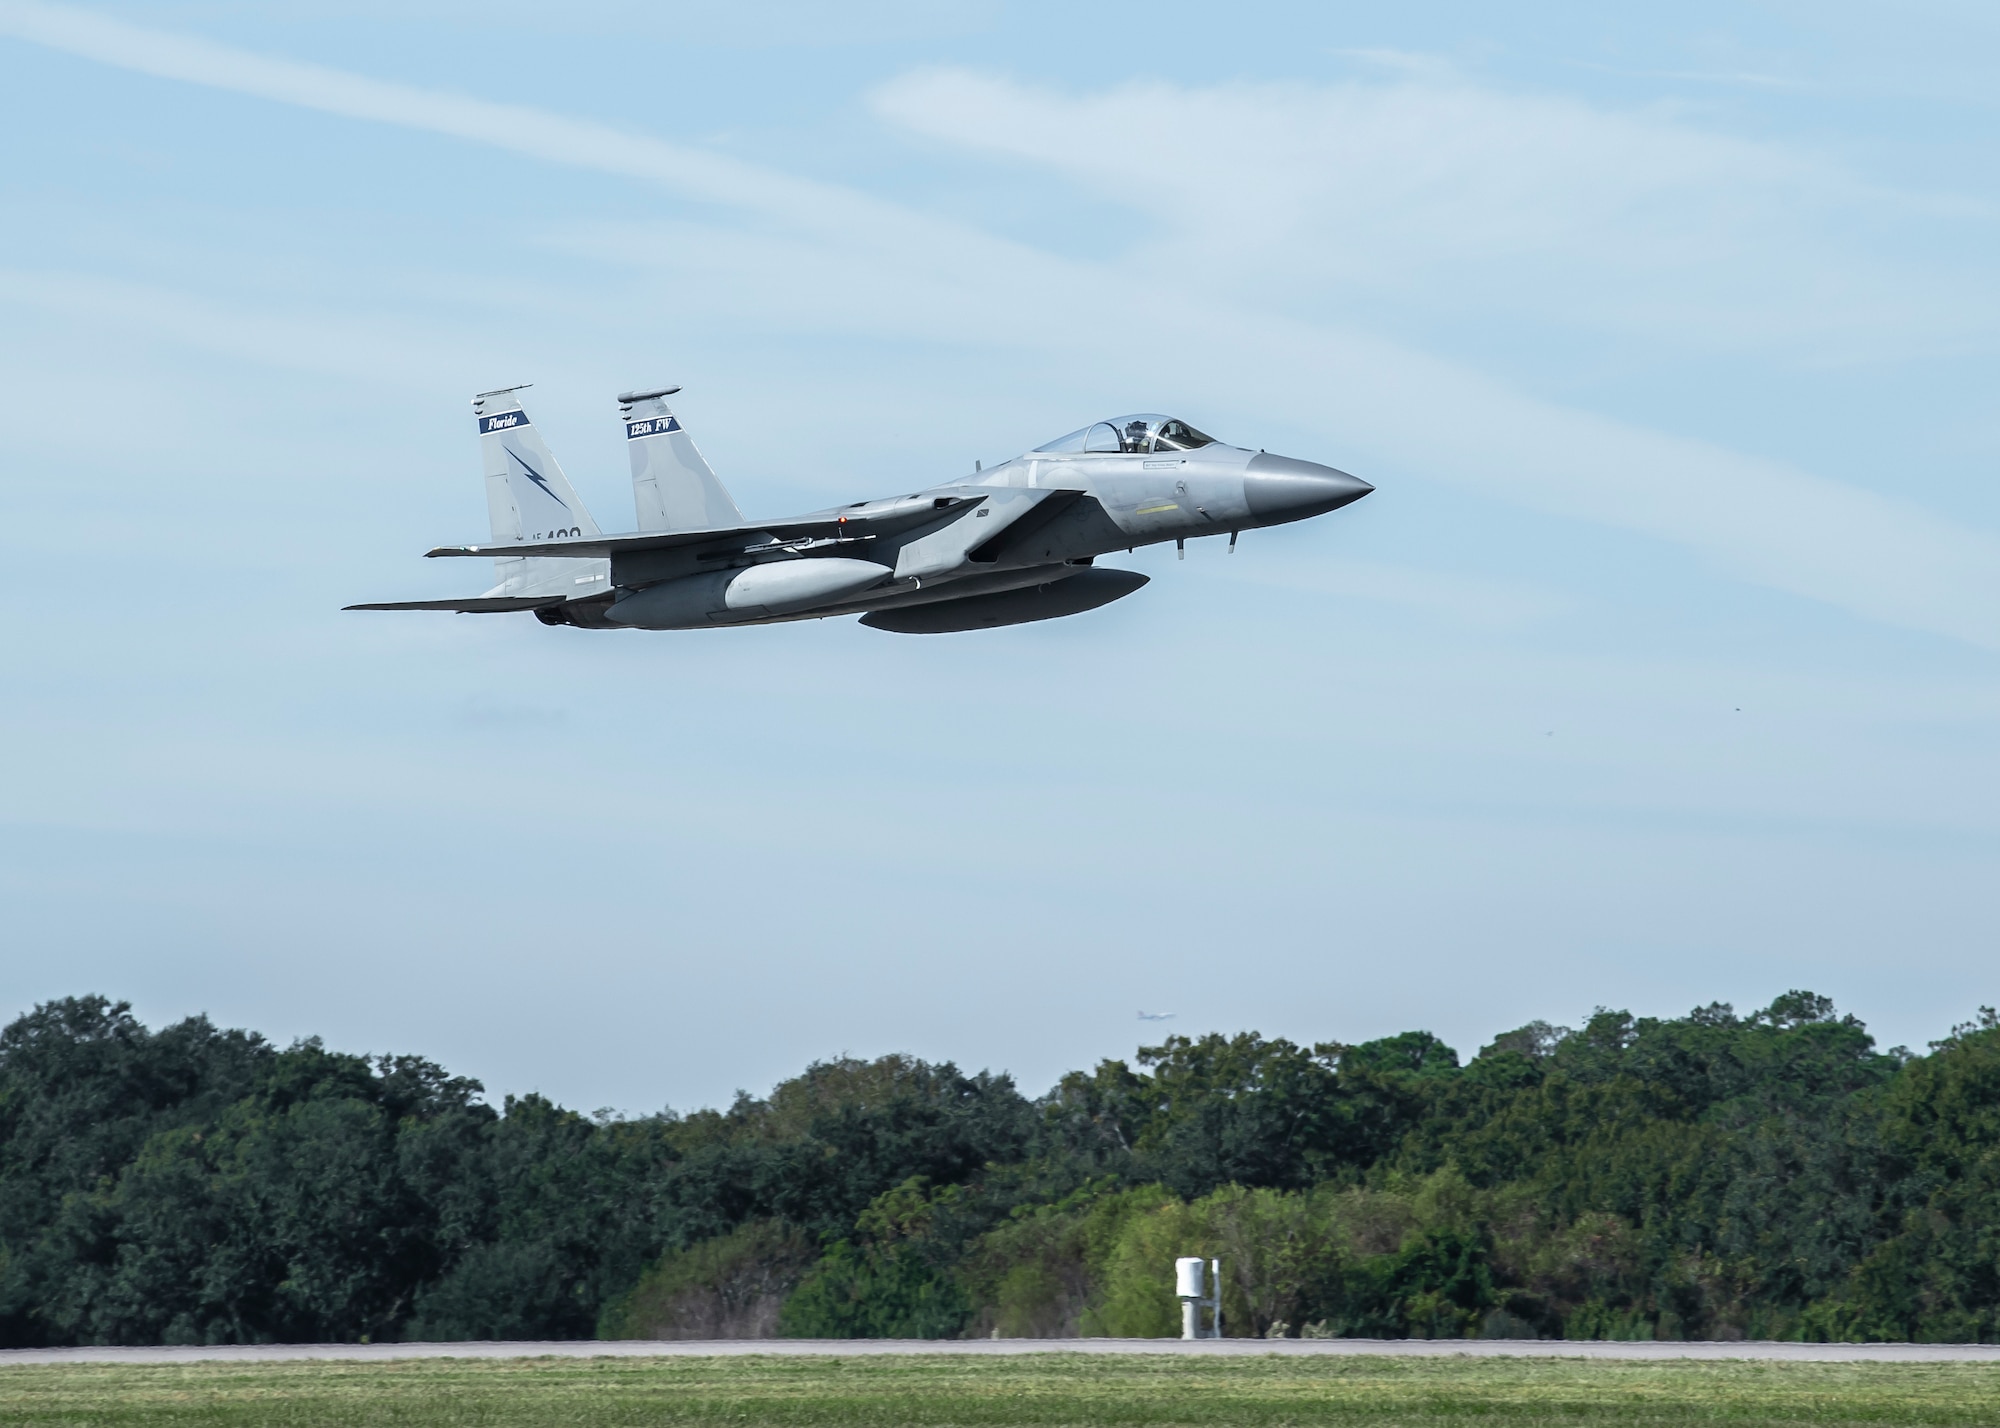 An F-15C Eagle aircraft from the 159th Fighter Squadron, 125th Fighter Wing, Florida Air National Guard, takes off from MacDill Air Force Base, Florida, Dec. 3, 2021.